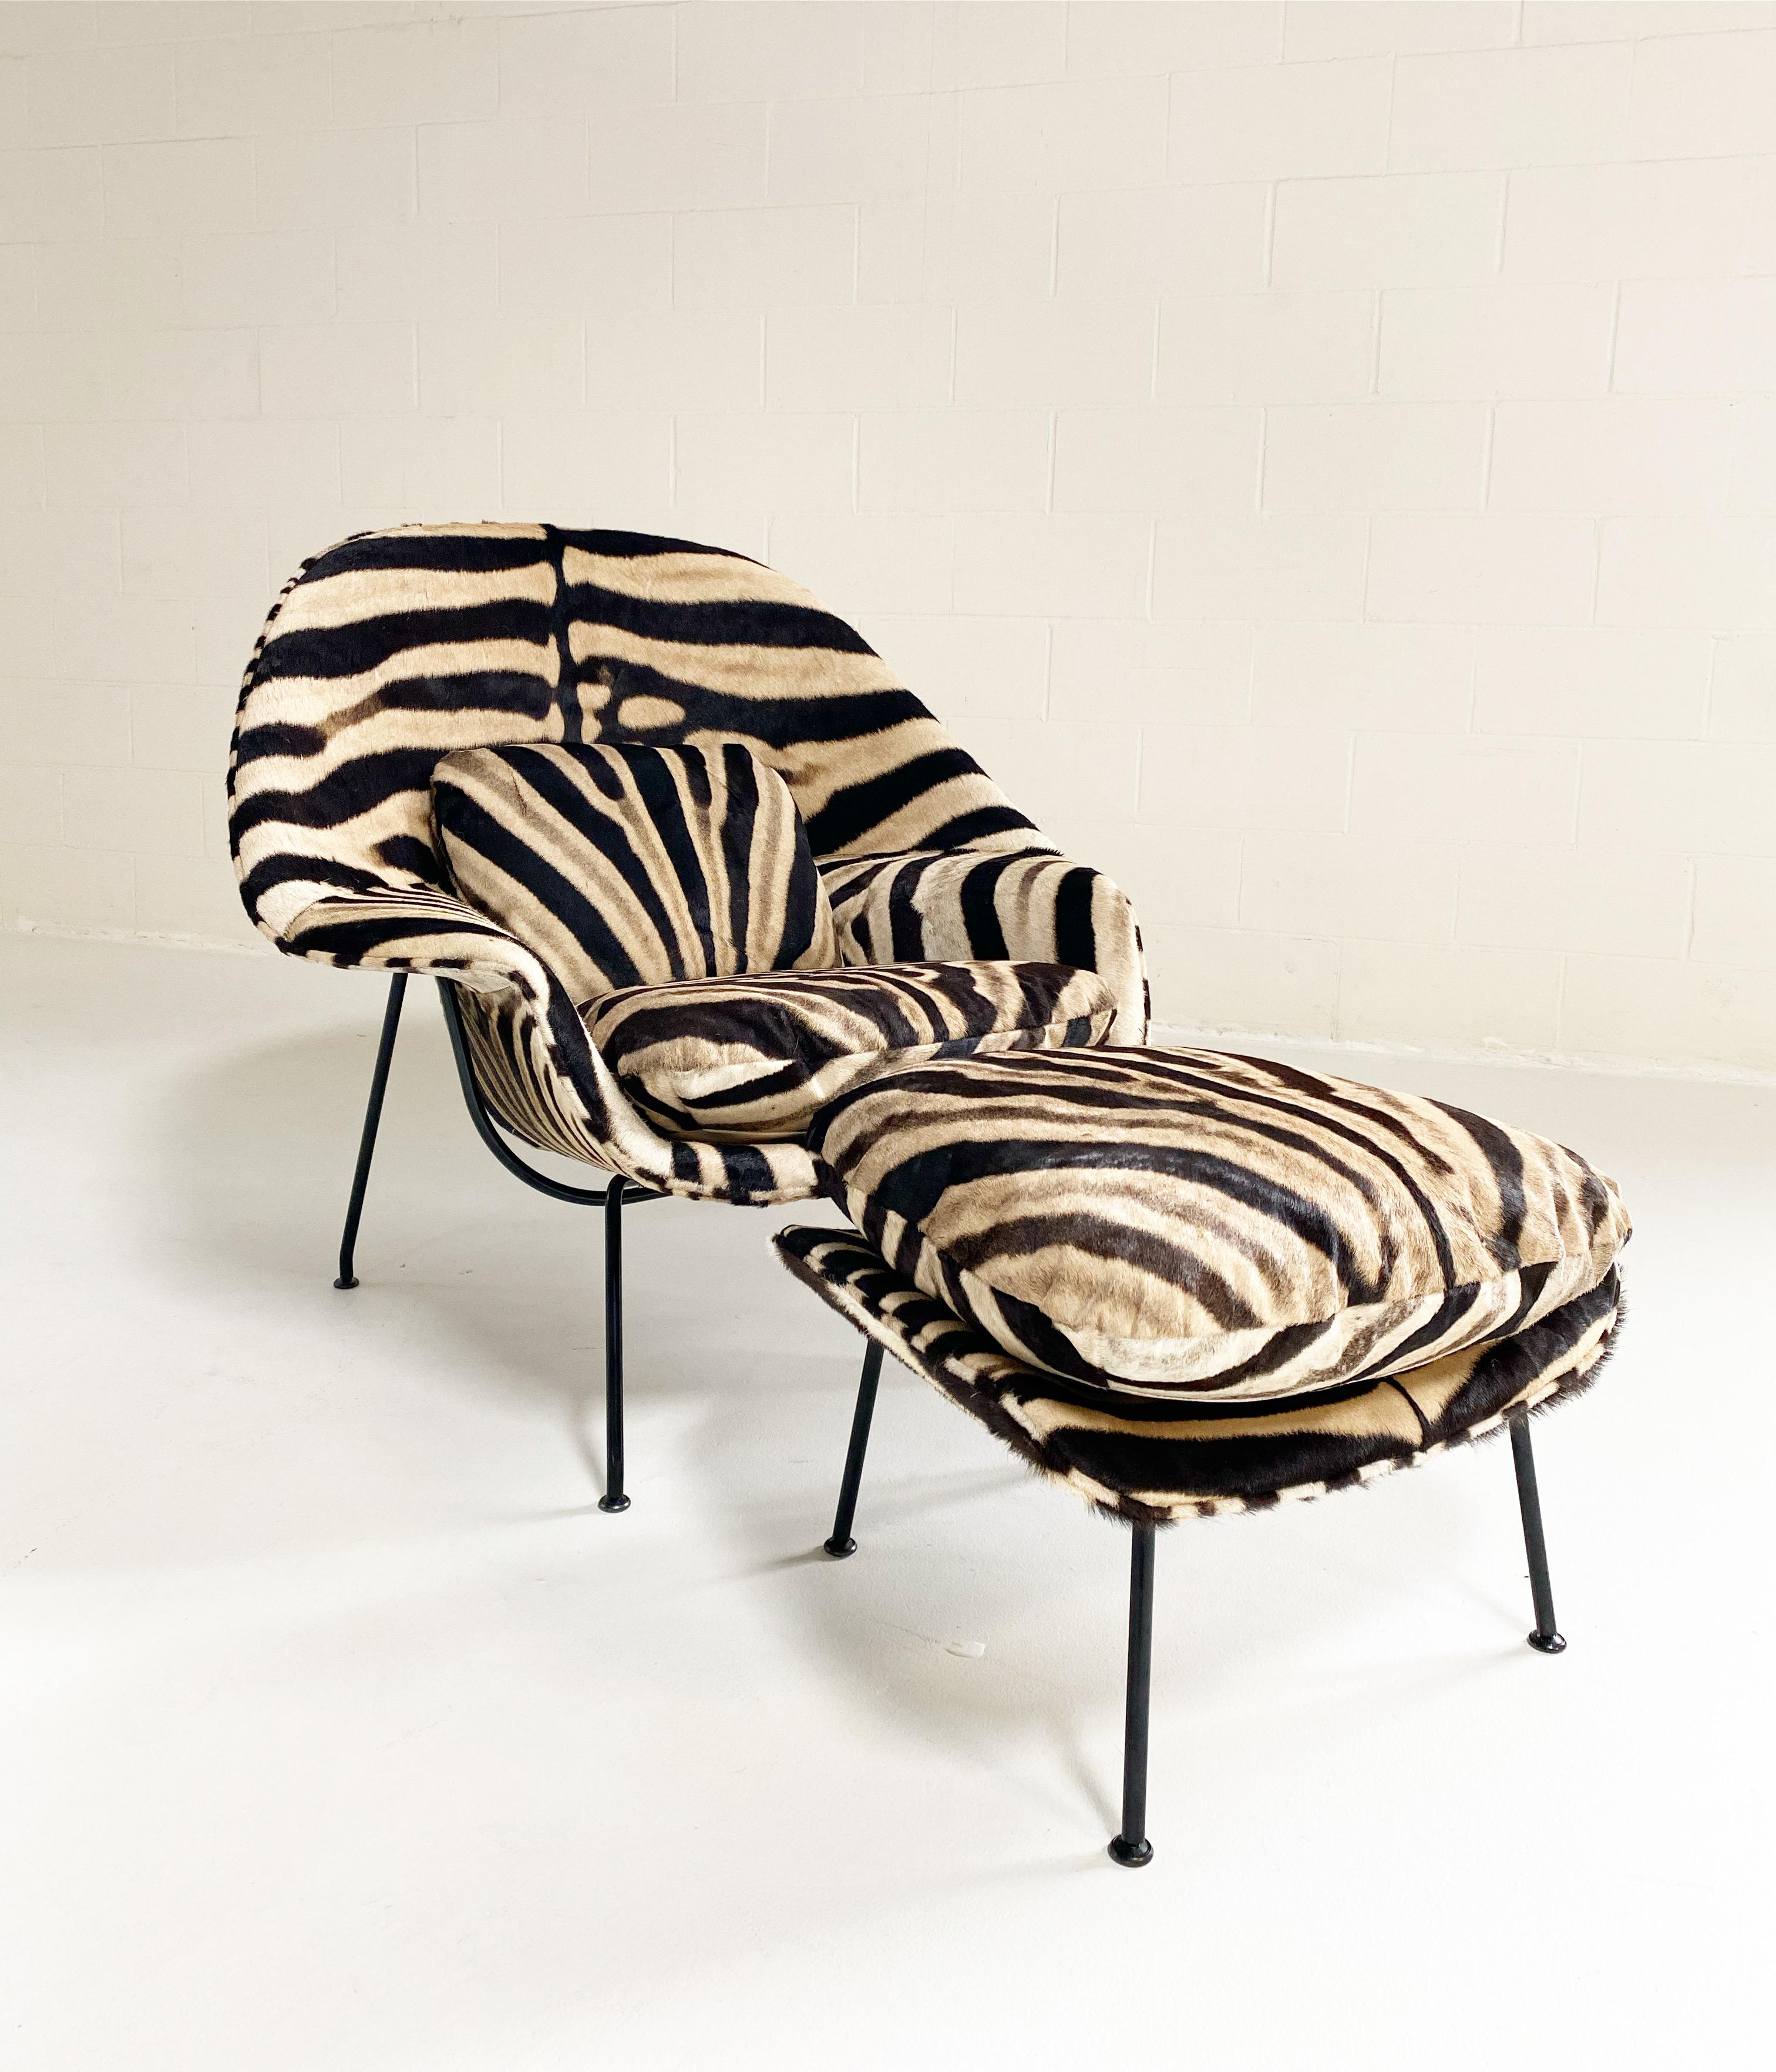 Forsyth Bespoke Eero Saarinen Womb Chair and Ottoman in Zebra In Excellent Condition For Sale In SAINT LOUIS, MO